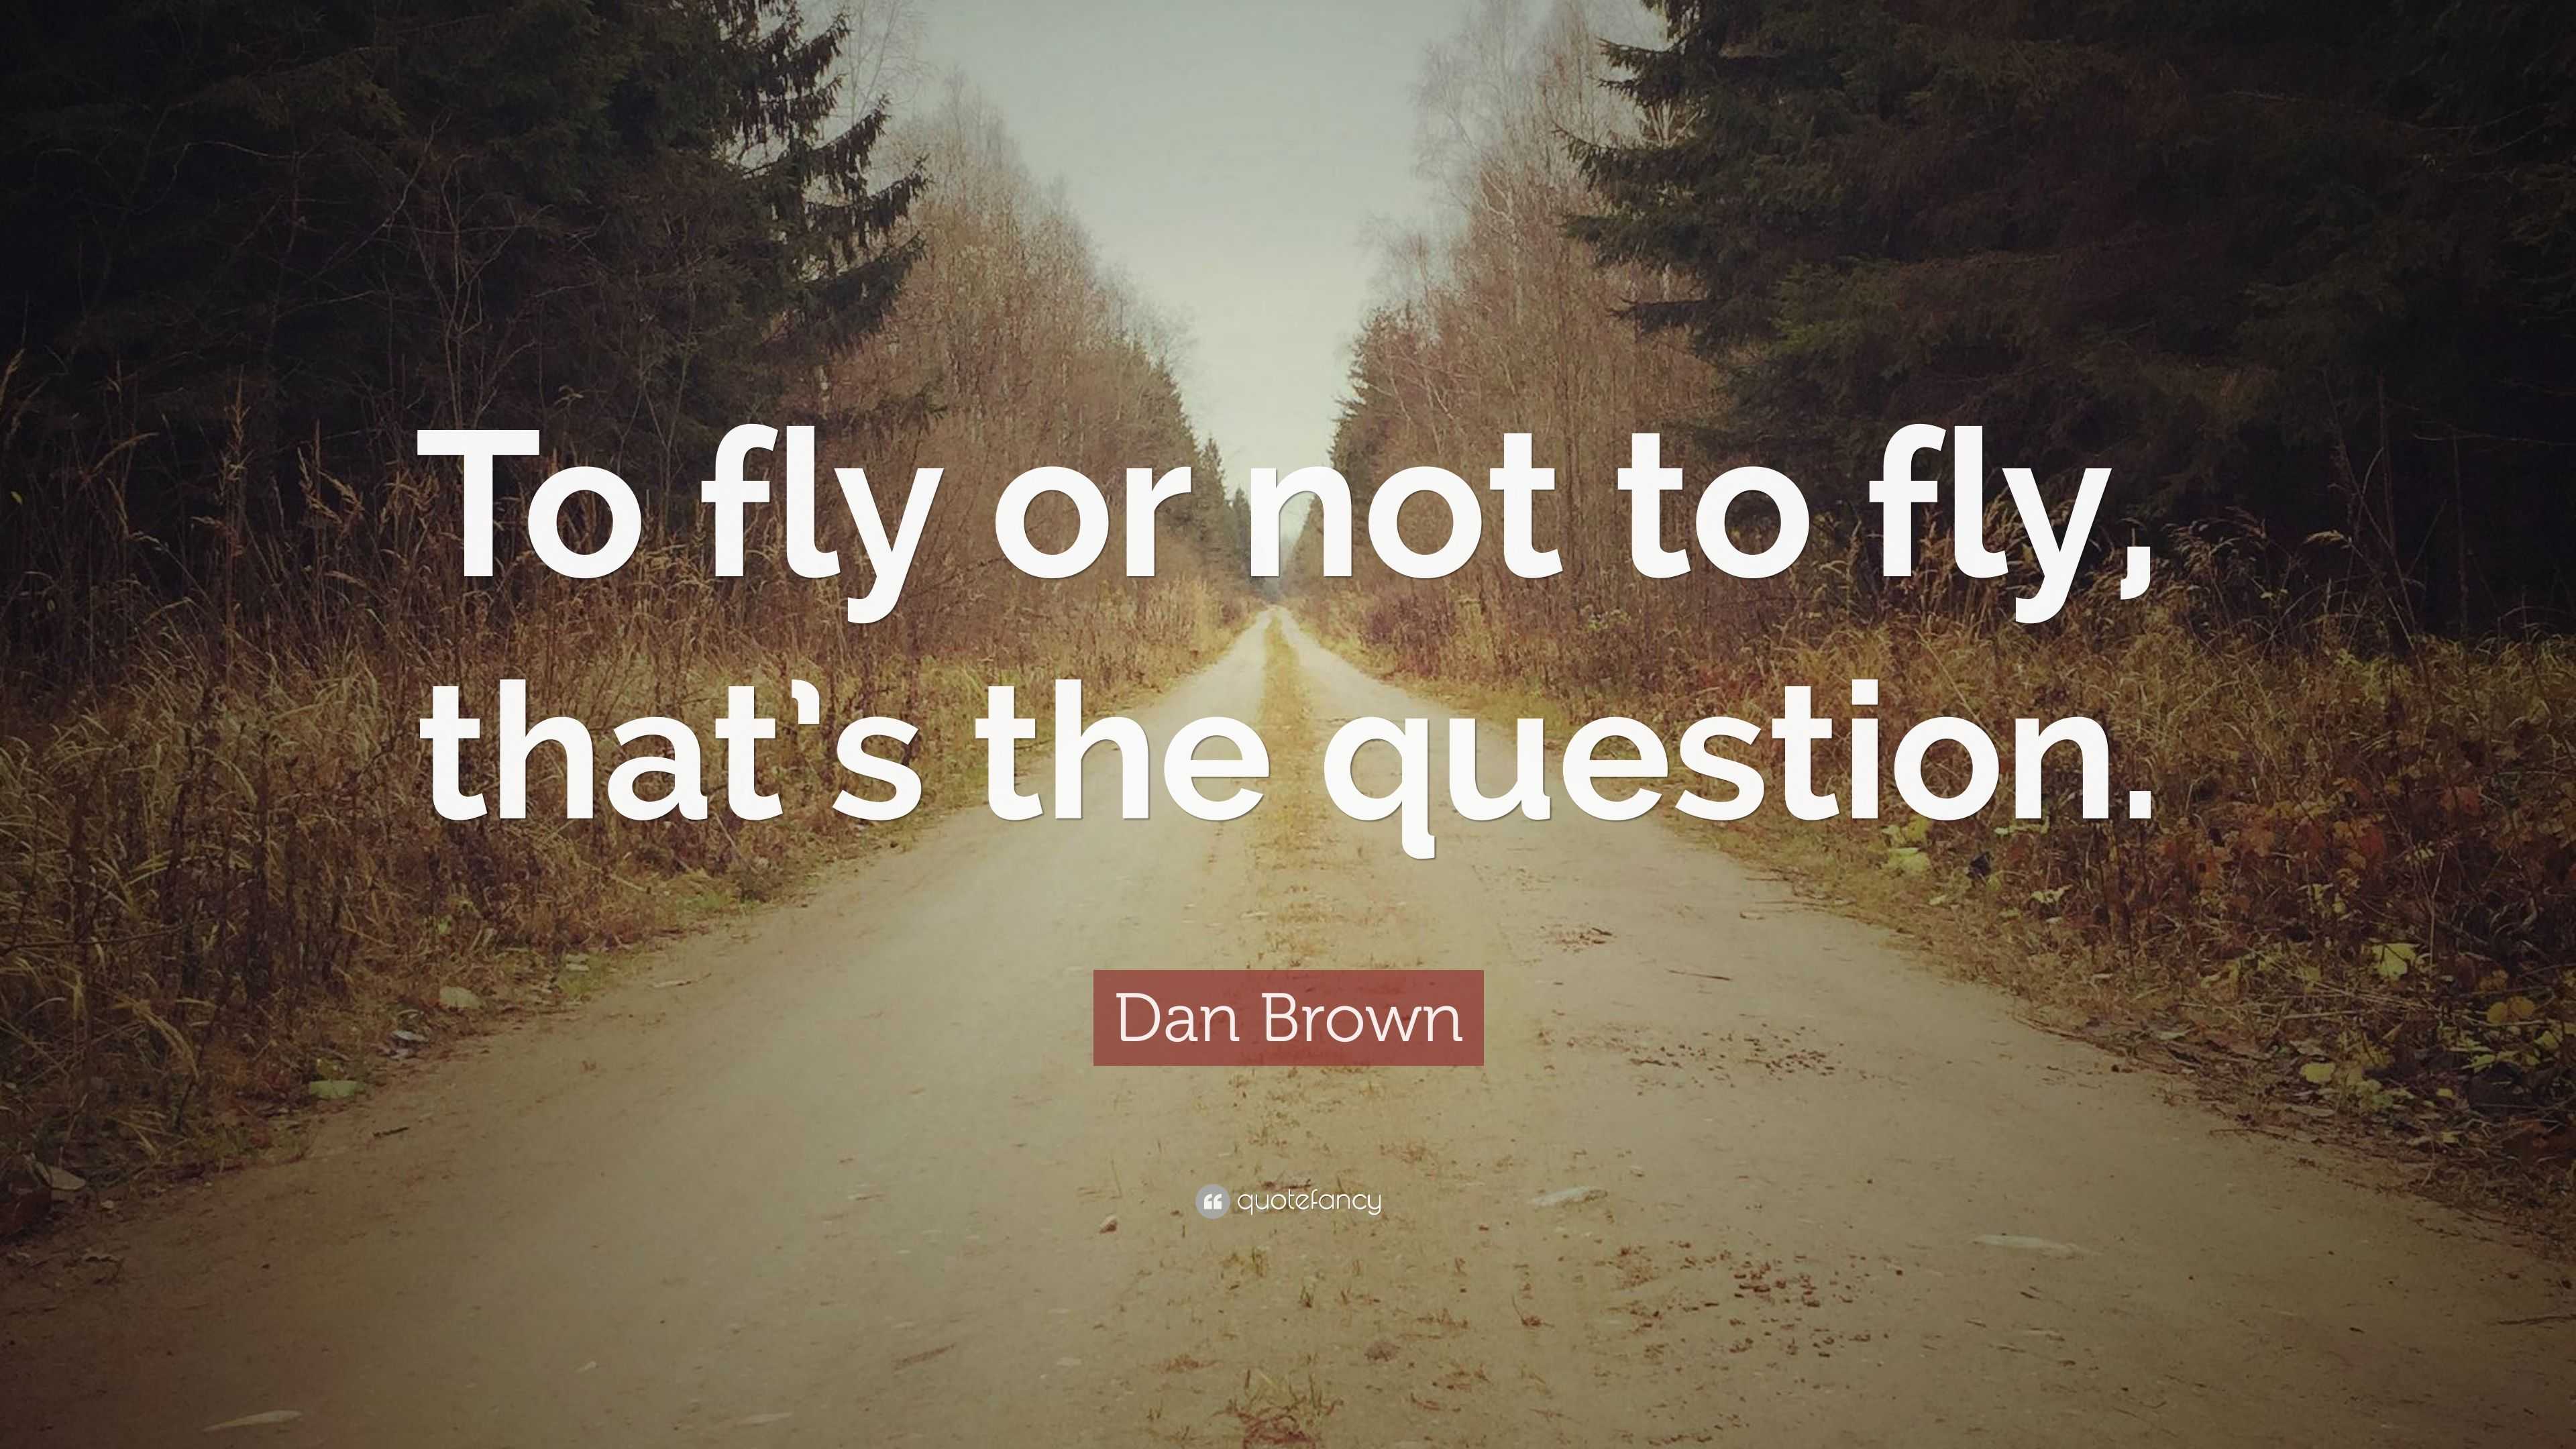 Dan Brown Quote: “To fly or not to fly, that’s the question.”